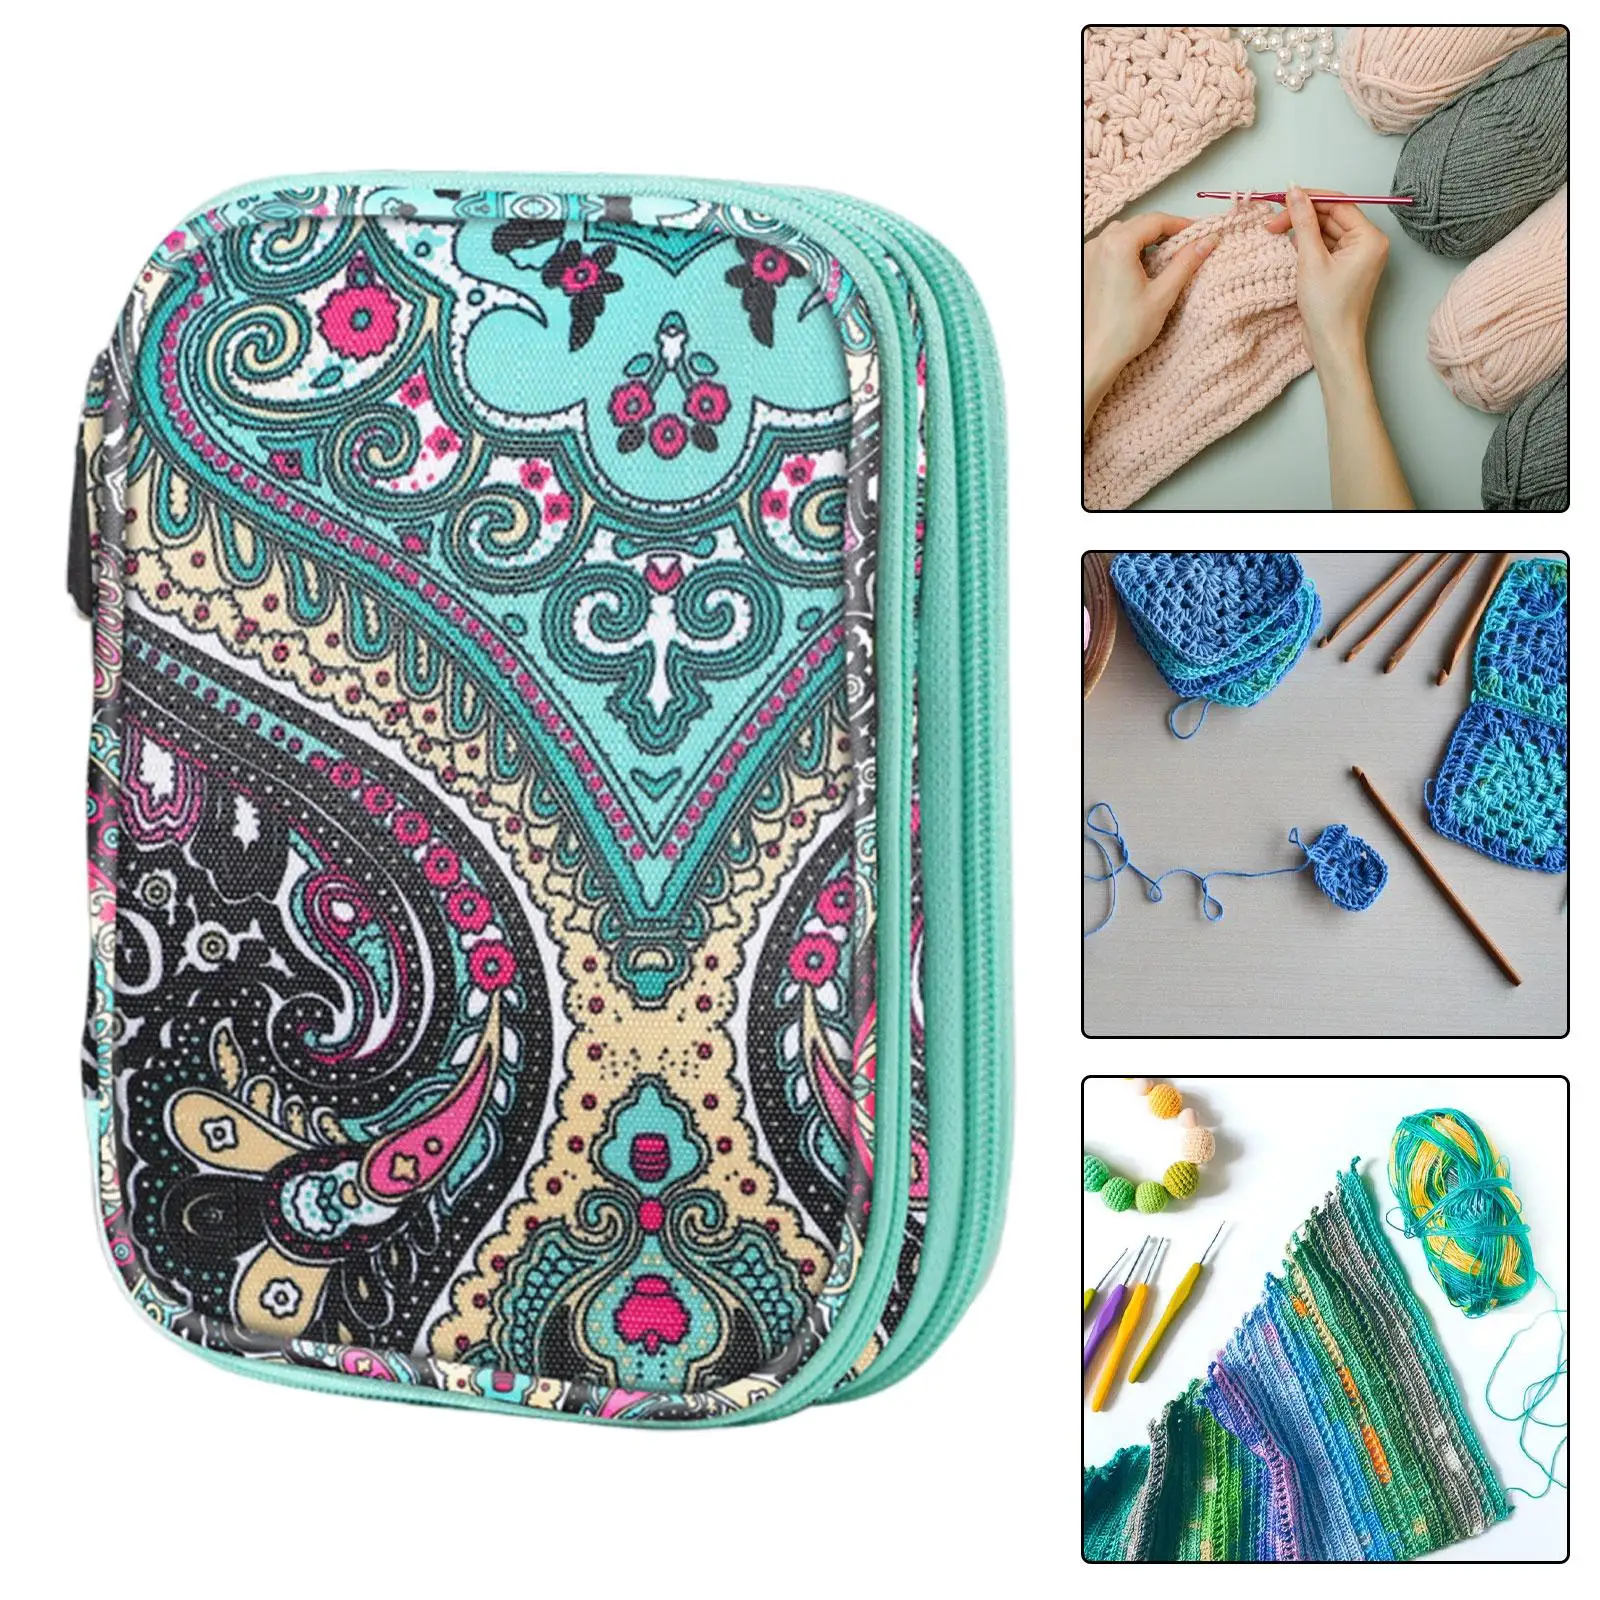 Knitting Needle Storage Bag Knitting Needle Case Floral Patternc Easy to Carry Knitting Bag Organizer Case Crochet Hook Case